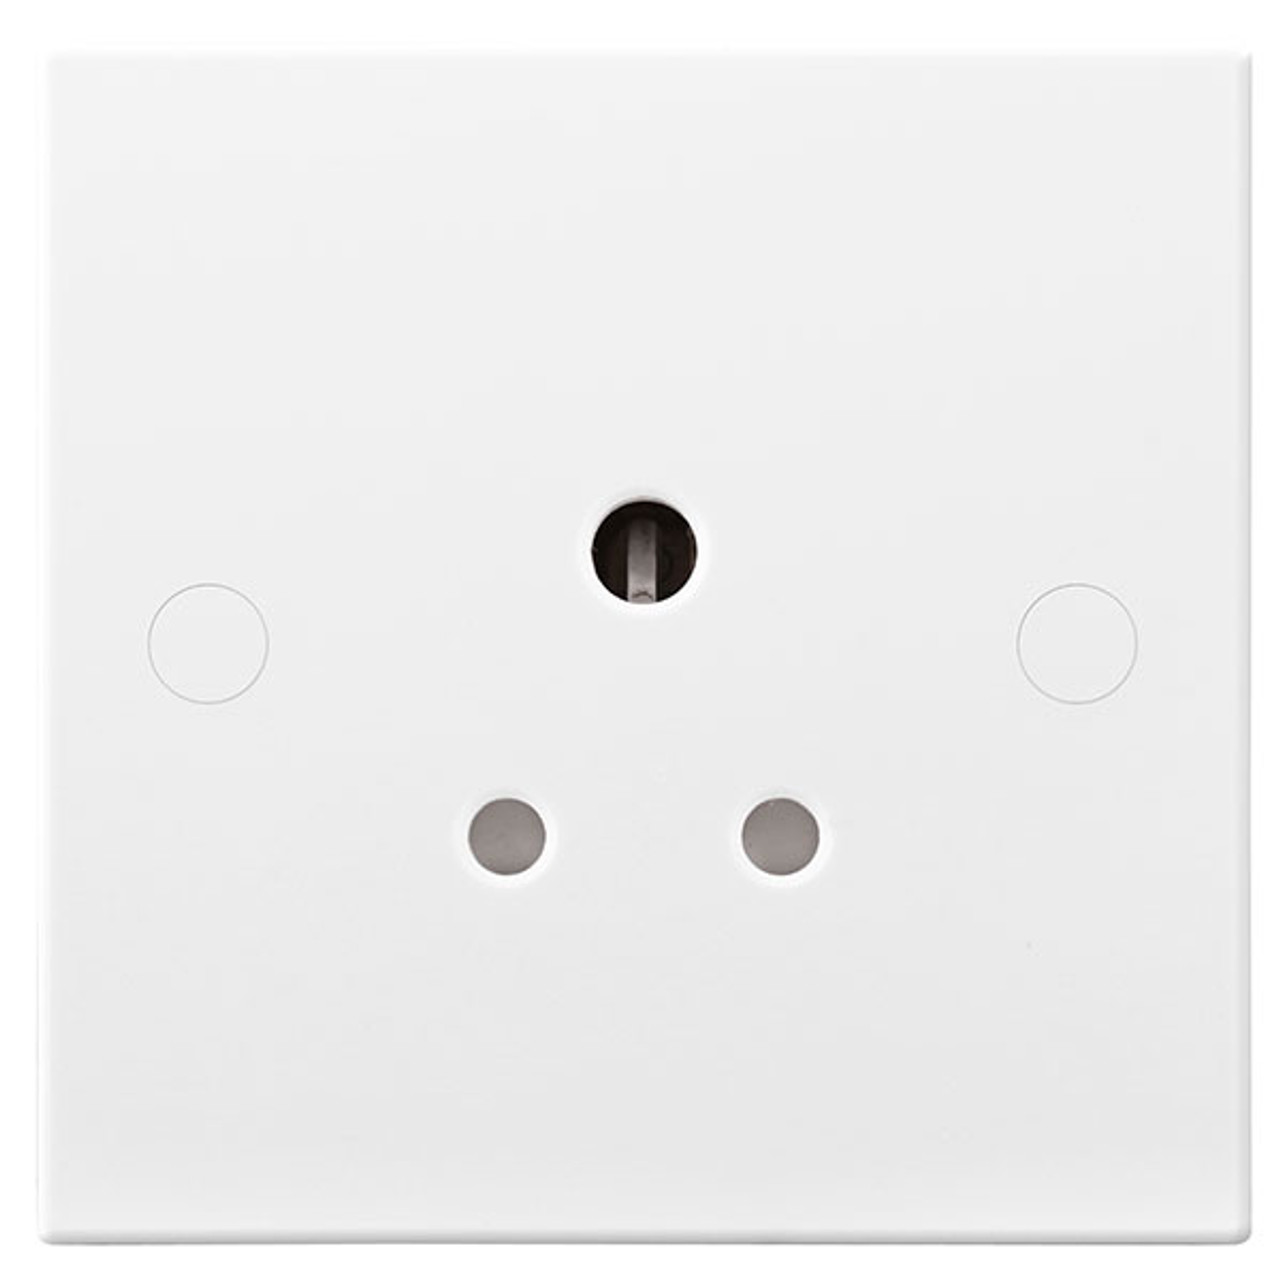 BG Nexus 929 Moulded White Square Edge 5A - 1 gang, unswitched socket, round pin